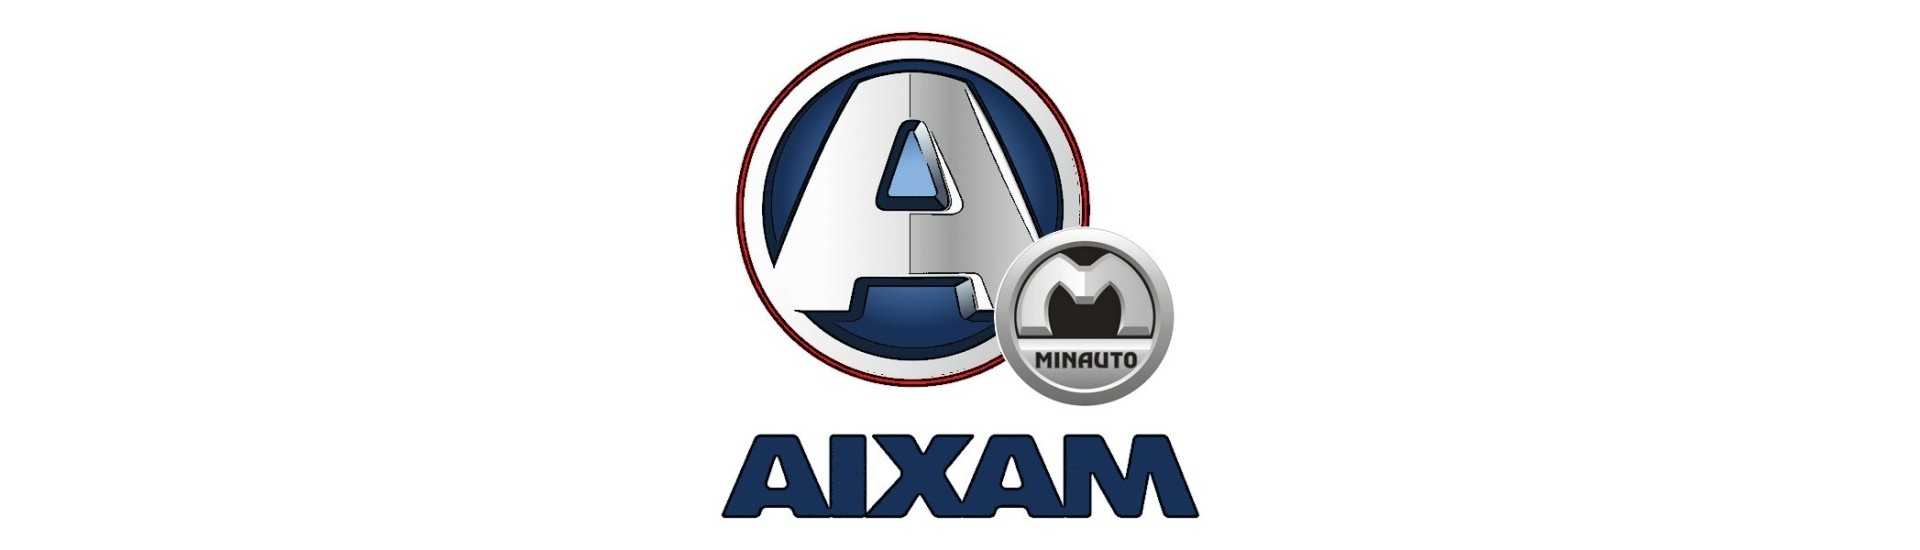 Hayon glass at the best price for car without a permit Aixam Minauto